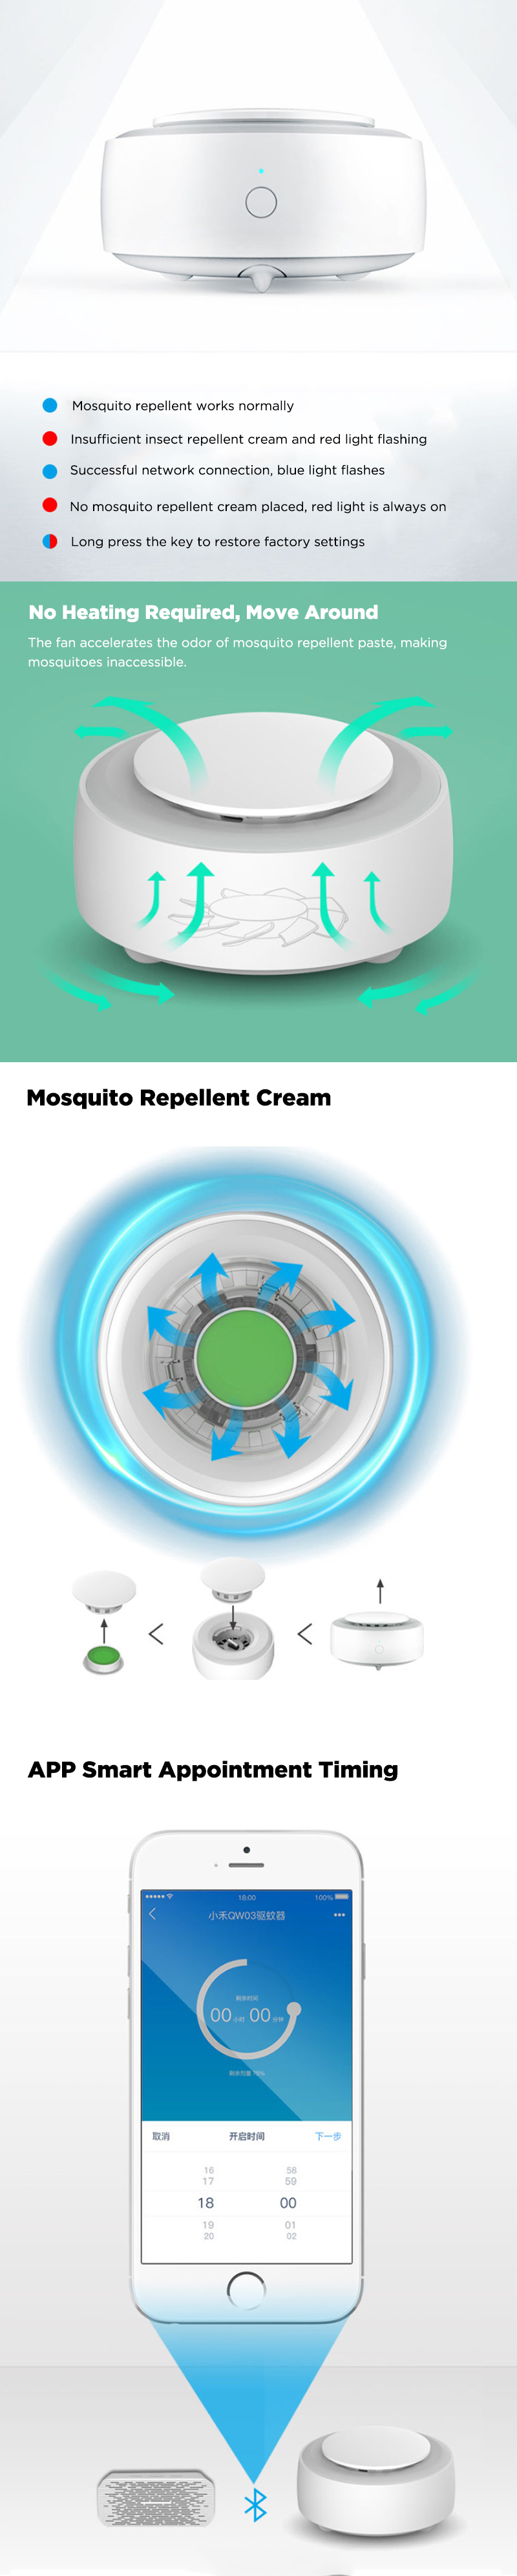 Mosquito-Dispeller-Electronic-Ultrasonic-Mosquito-Insect-Repellent-Travel-Camping-Flying-Pest-Bug-Tr-1648177-2